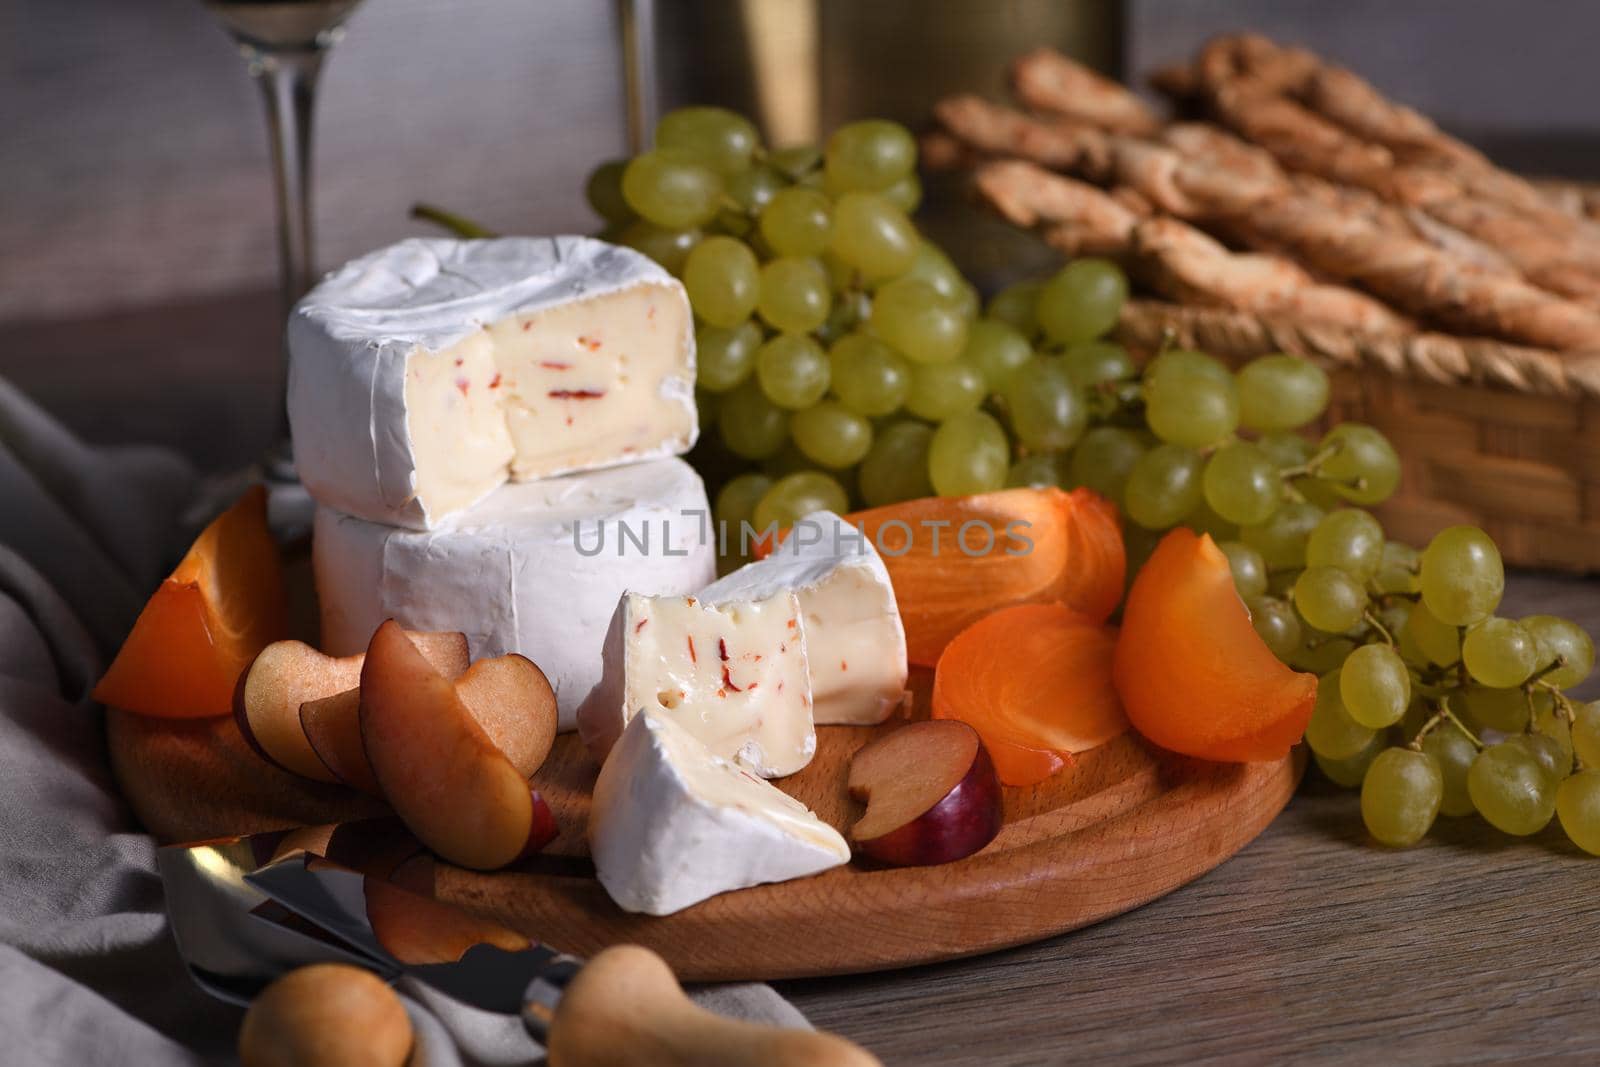 Cheese camembert with white grapes, sliced ​​persimmons and plums, a great appetizer for wine.